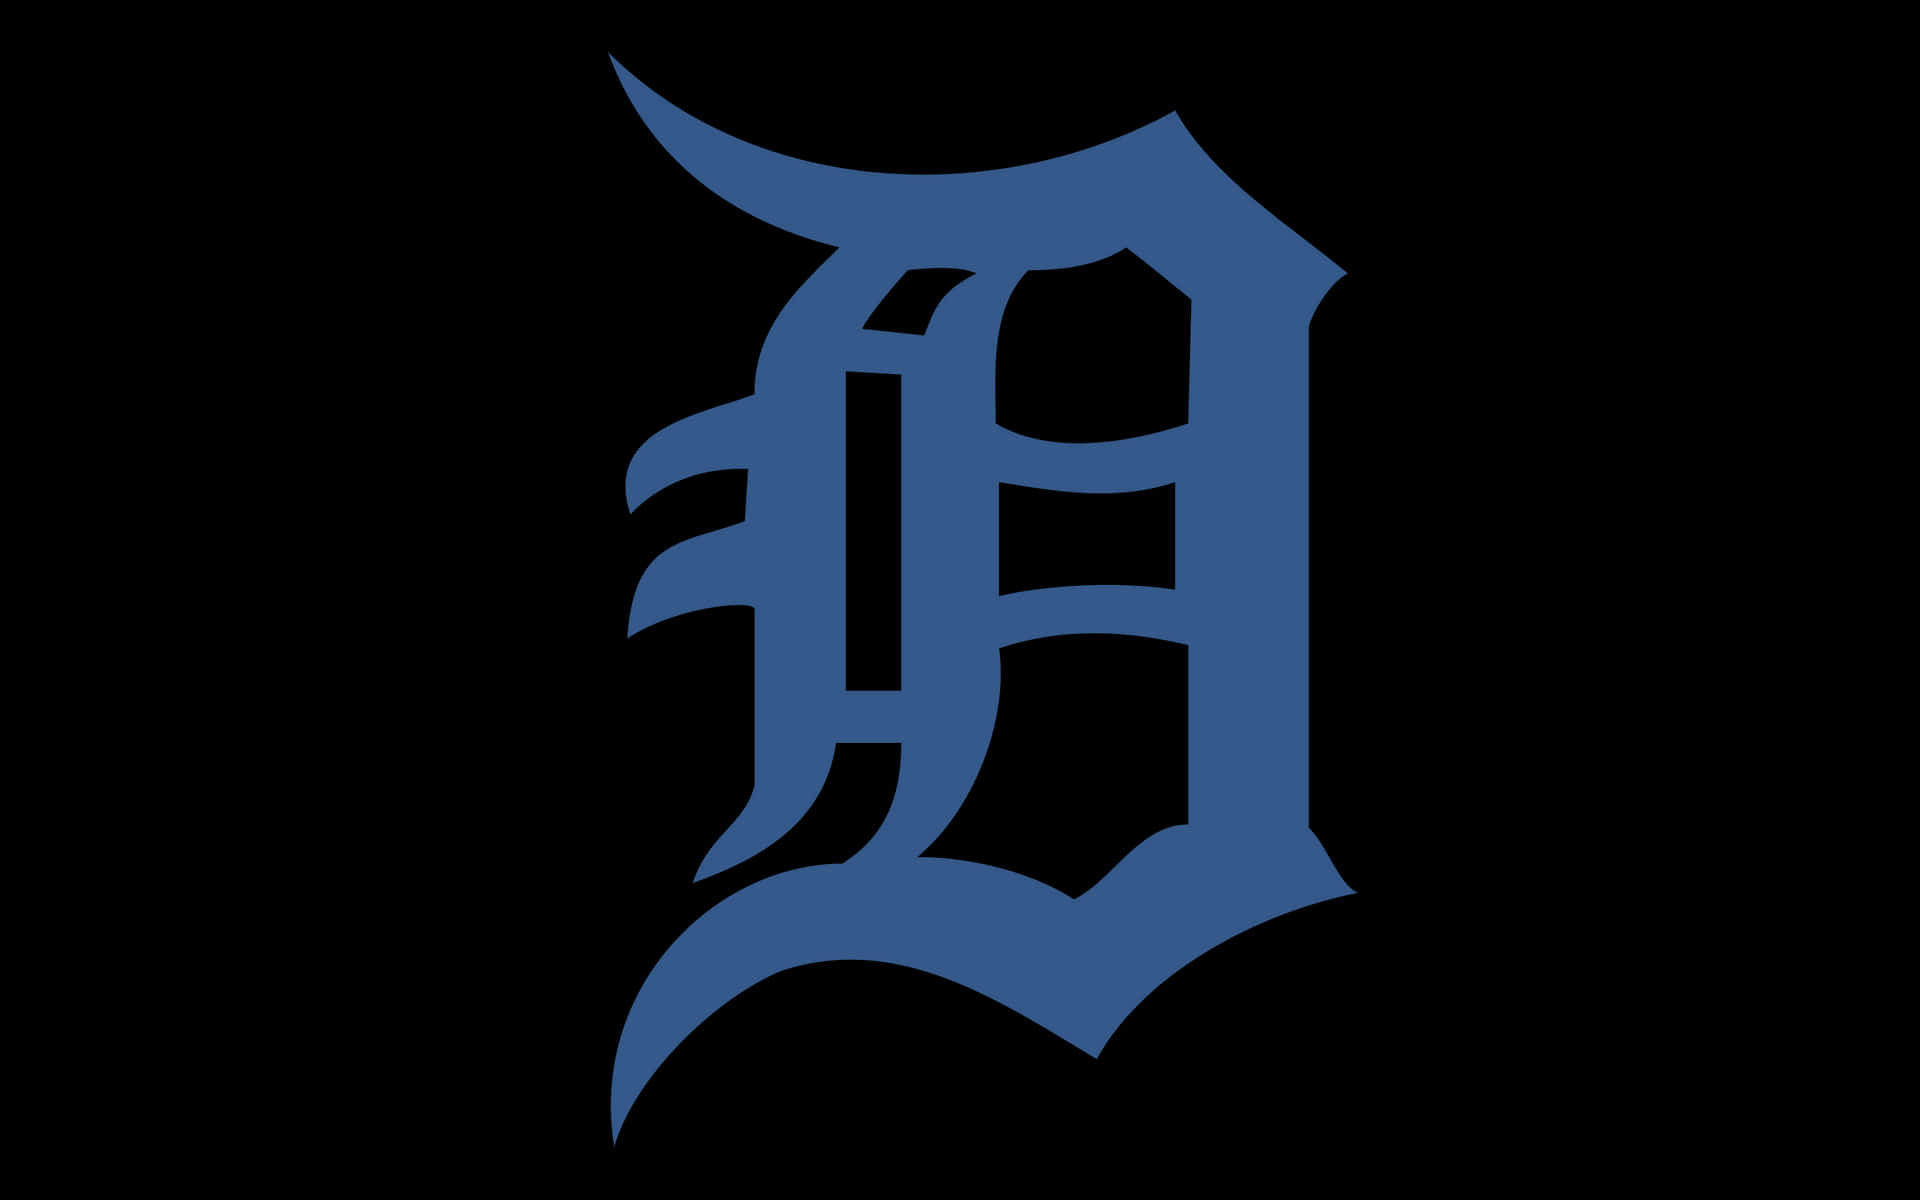 Detroit Tigers sign Keston Hiura Detroit Tigers Acquire T.J. Hopkins Detroit Tigers Opening Day Starting Lineup Andre Lipcius Detroit Tigers Cut Detroit Tigers OF Riley Greene Detroit Tigers P Tyler Mattison Detroit Tigers Pitching Rotation Detroit Tigers injury Report Andy Ibanez